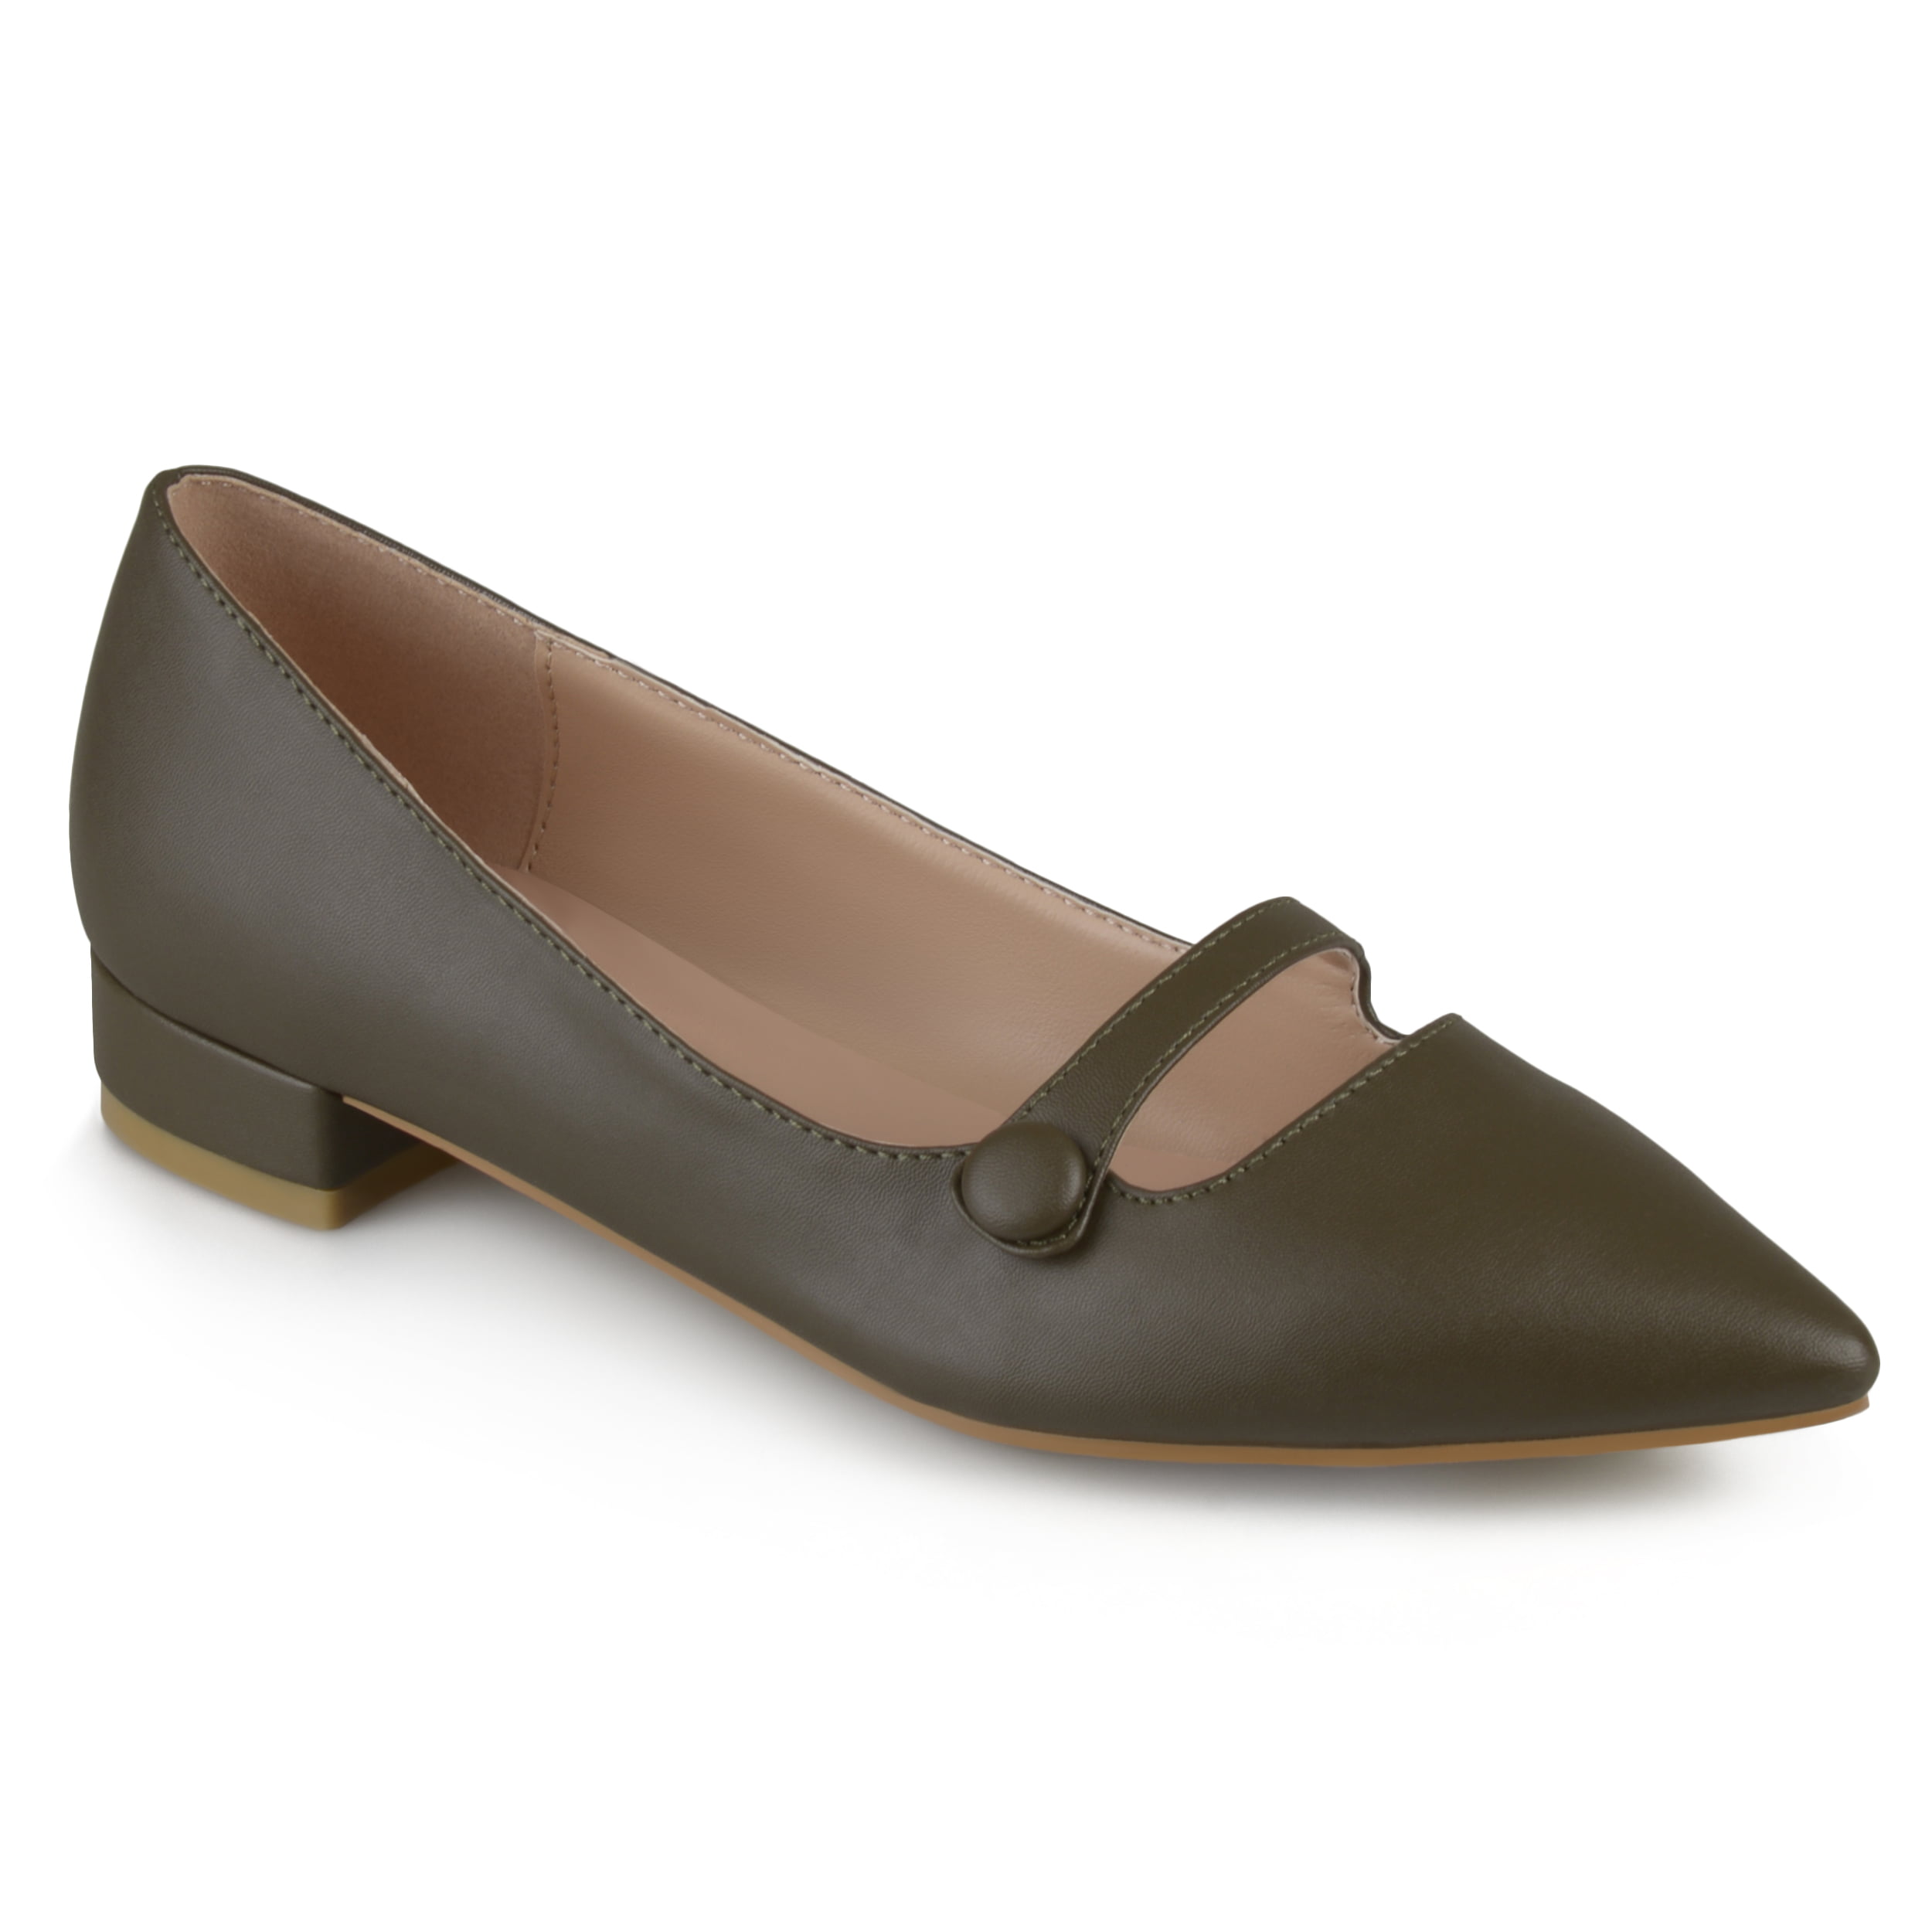 Brinley Co. - Womens Pointed Toe Faux Leather Flats - Walmart.com ...